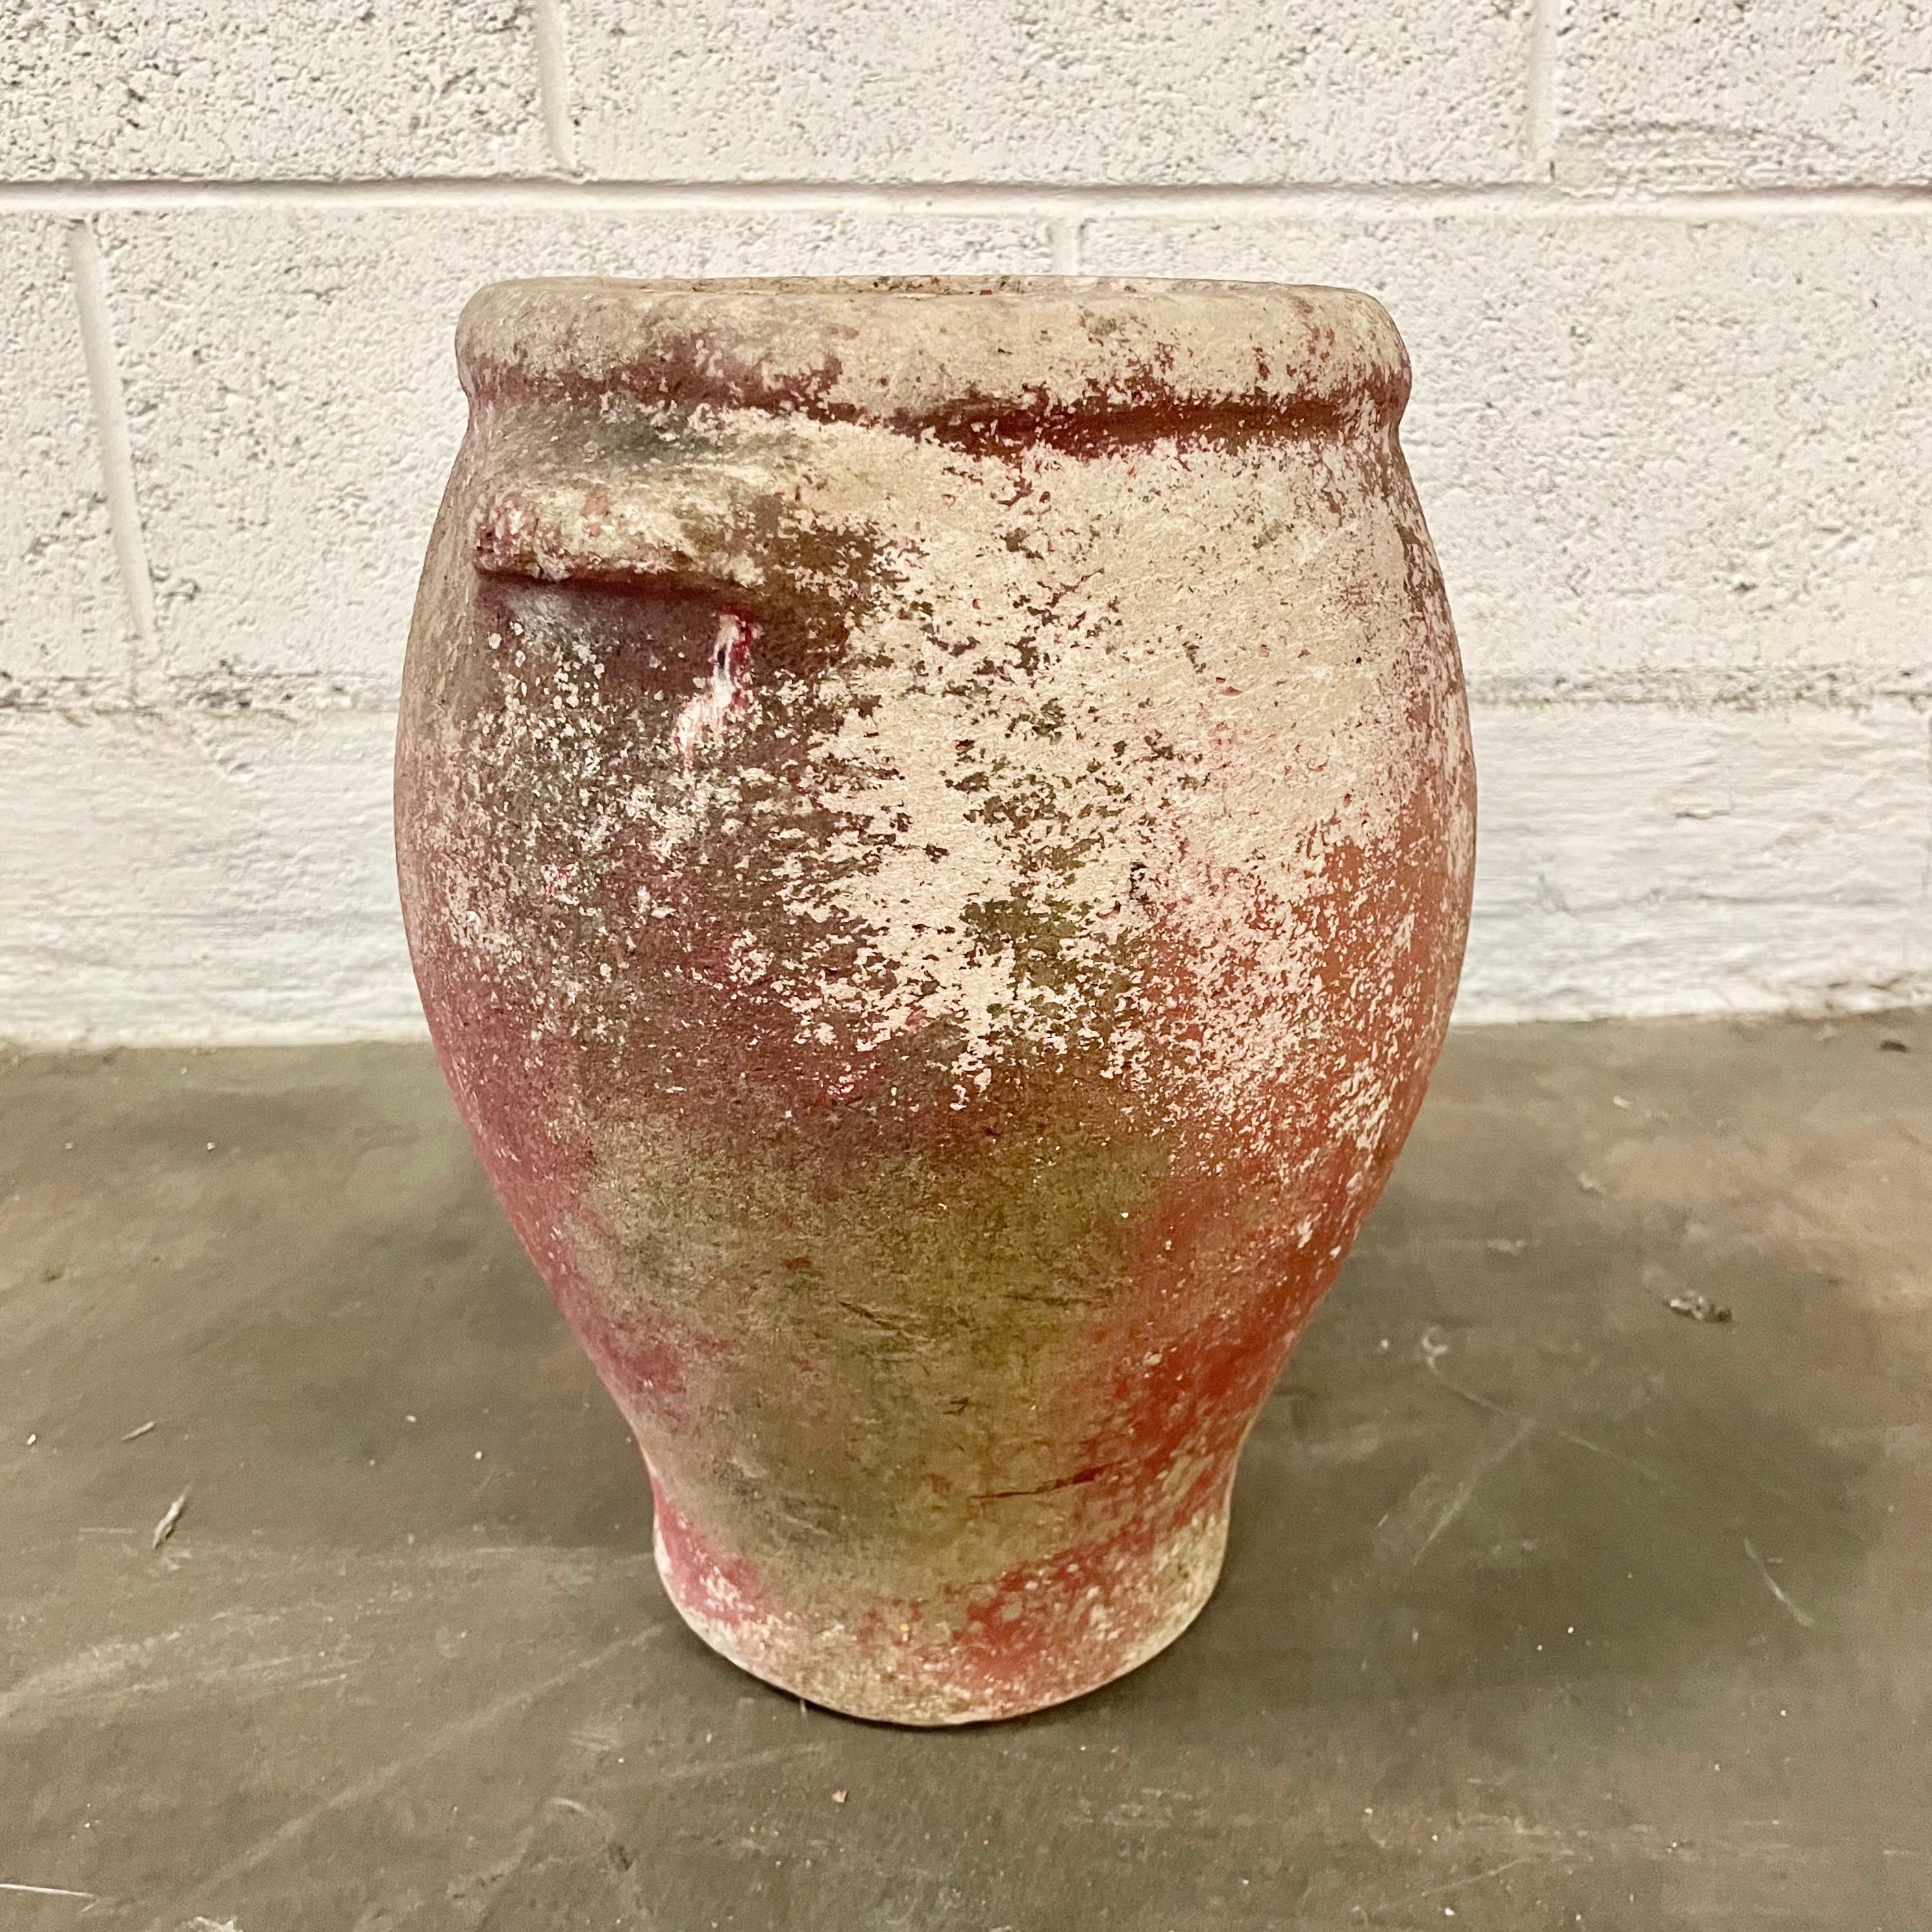 Petite concrete urn by Willy Guhl in a beautiful red patina. Urn has a delicate cement ridge around the mouth and two handles right under the upper rim. The body of the jar tapers down to the bottom. Great vintage condition. Only one available.